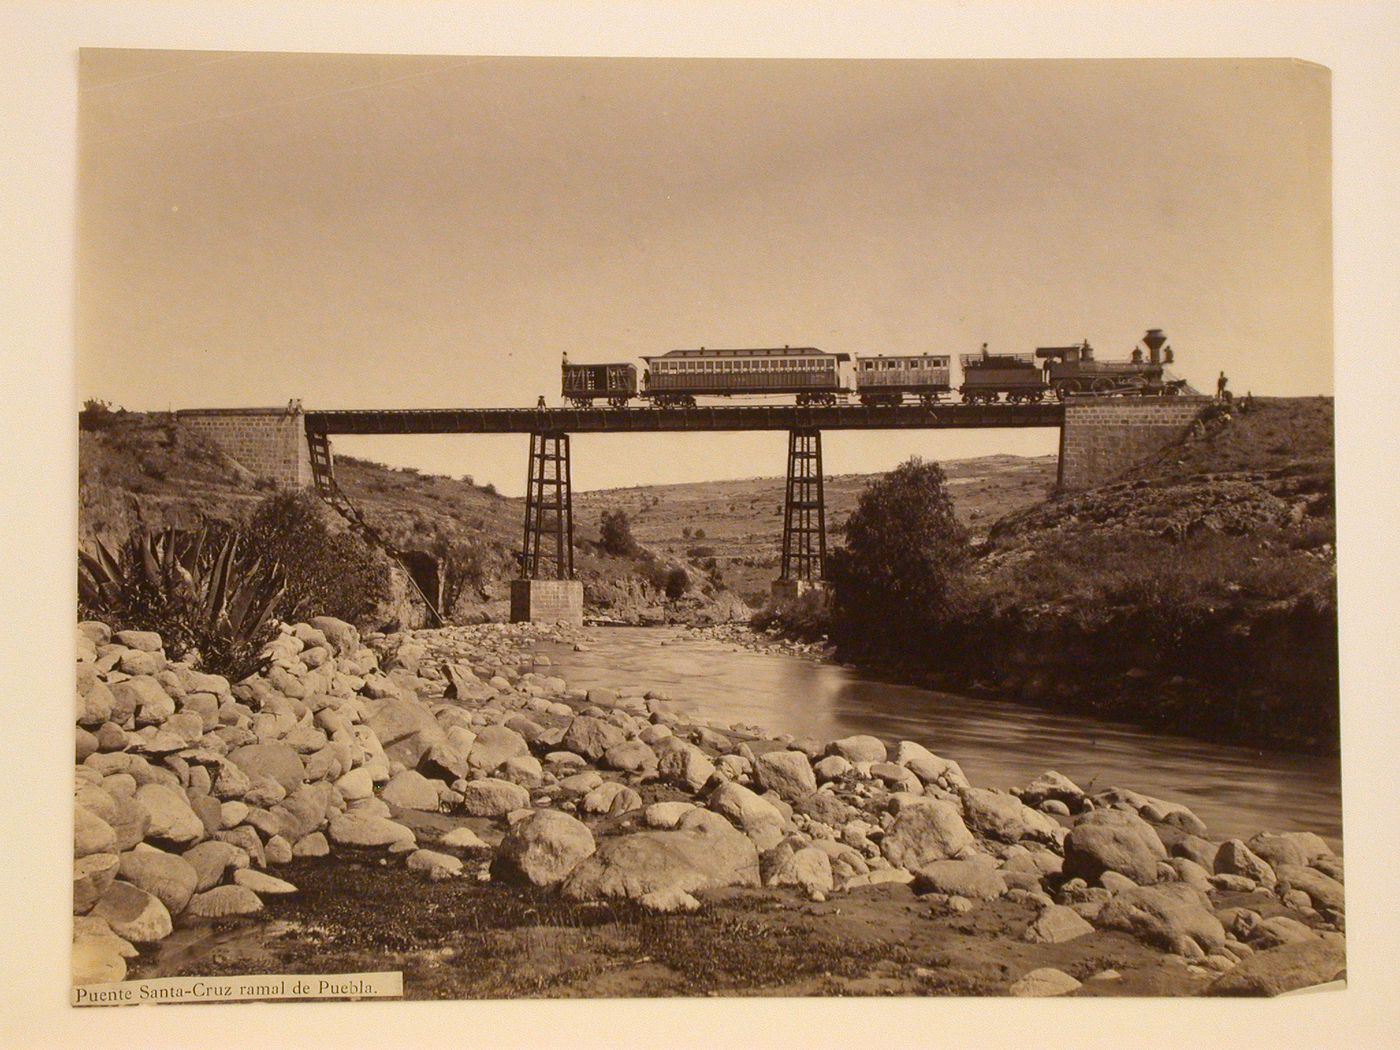 View of a train and people on the Santa-Cruz railroad bridge showing boulders and a river in the foreground, Puebla [?], Mexico